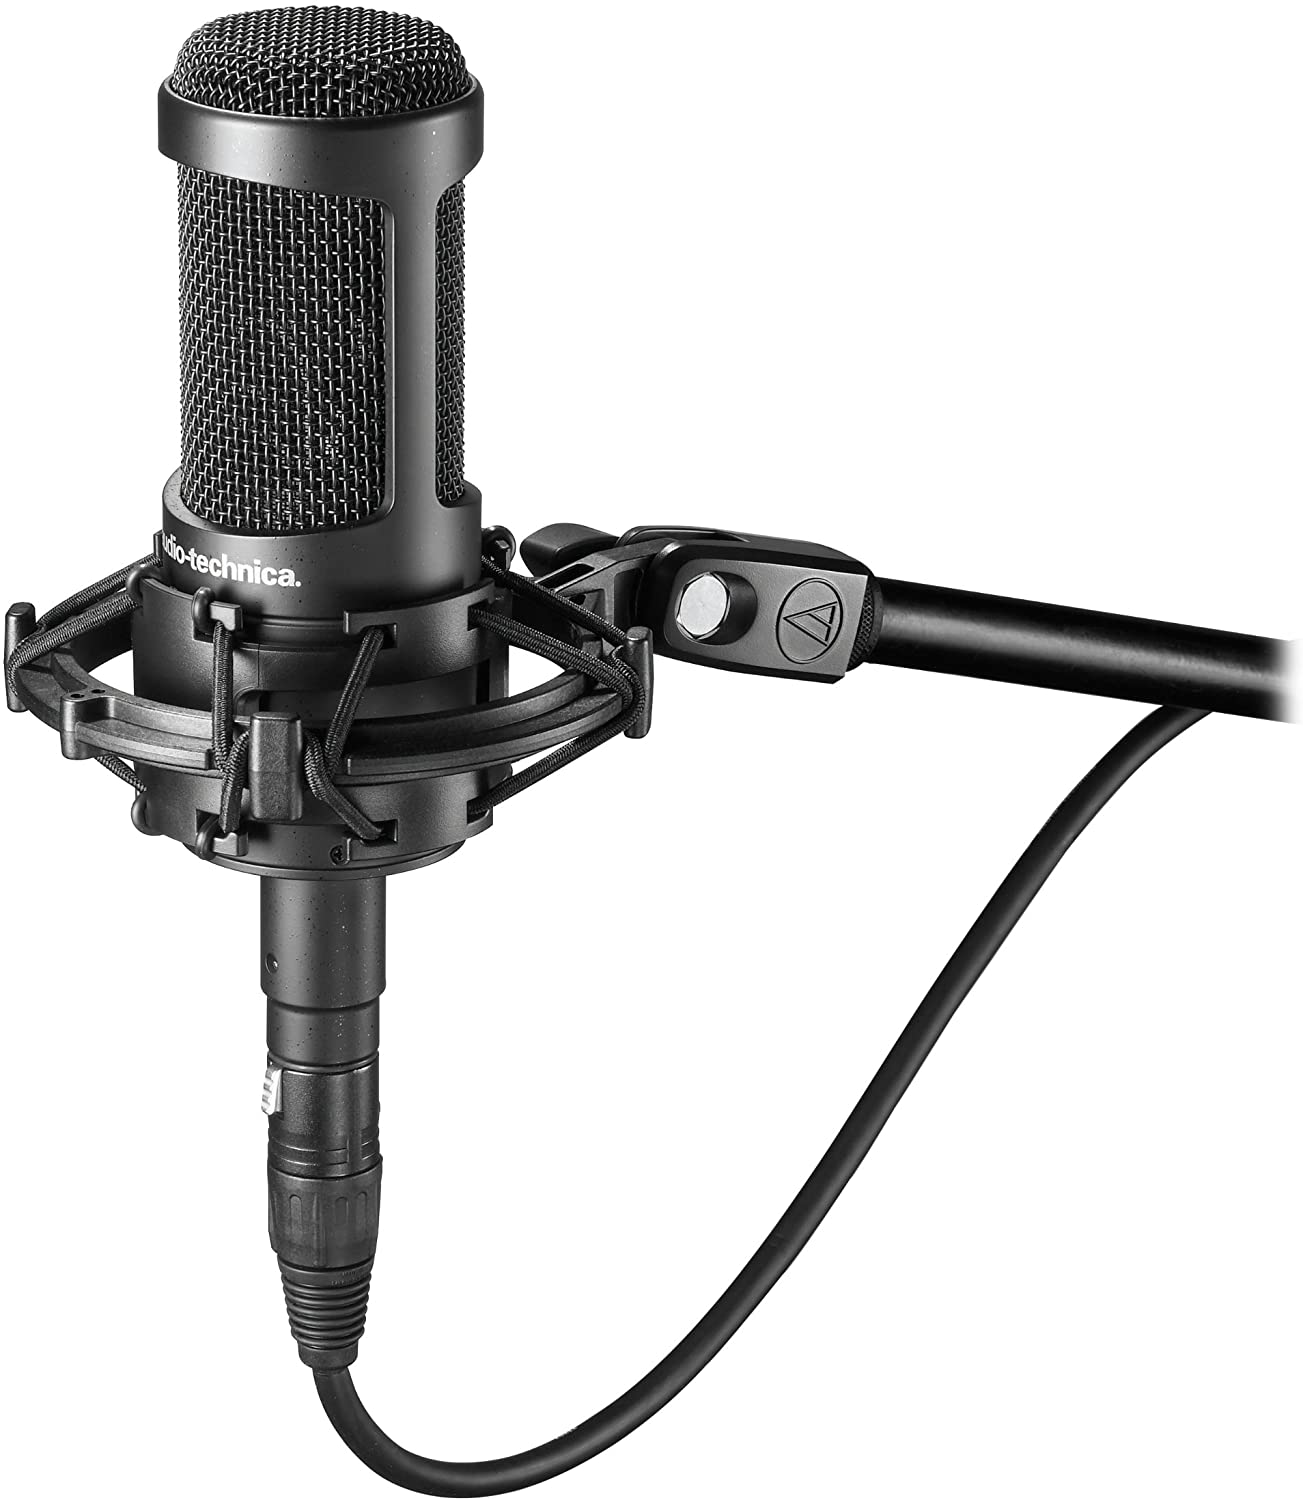 Audio Technica AT2050 Condenser Microphone black - Switchable polar patterns